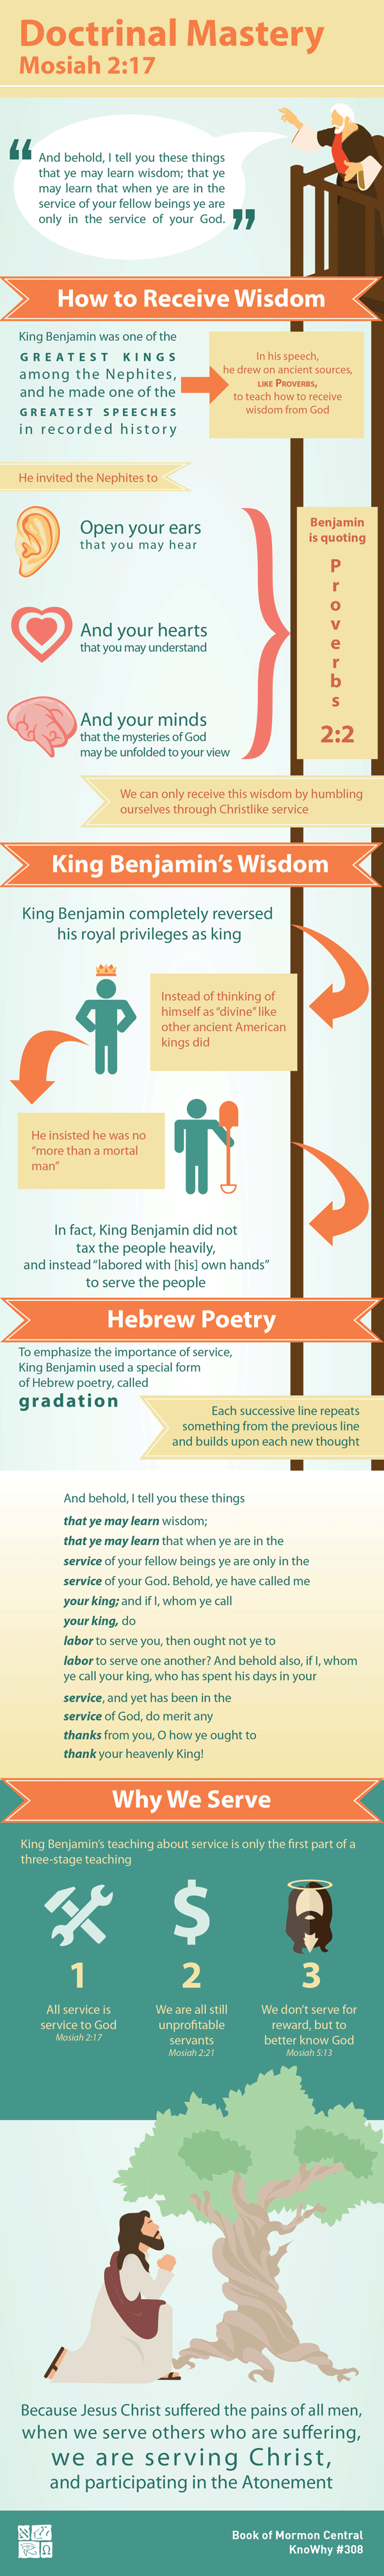 Doctrinal Mastery Mosiah 2:17 Infographic by Book of Mormon Central